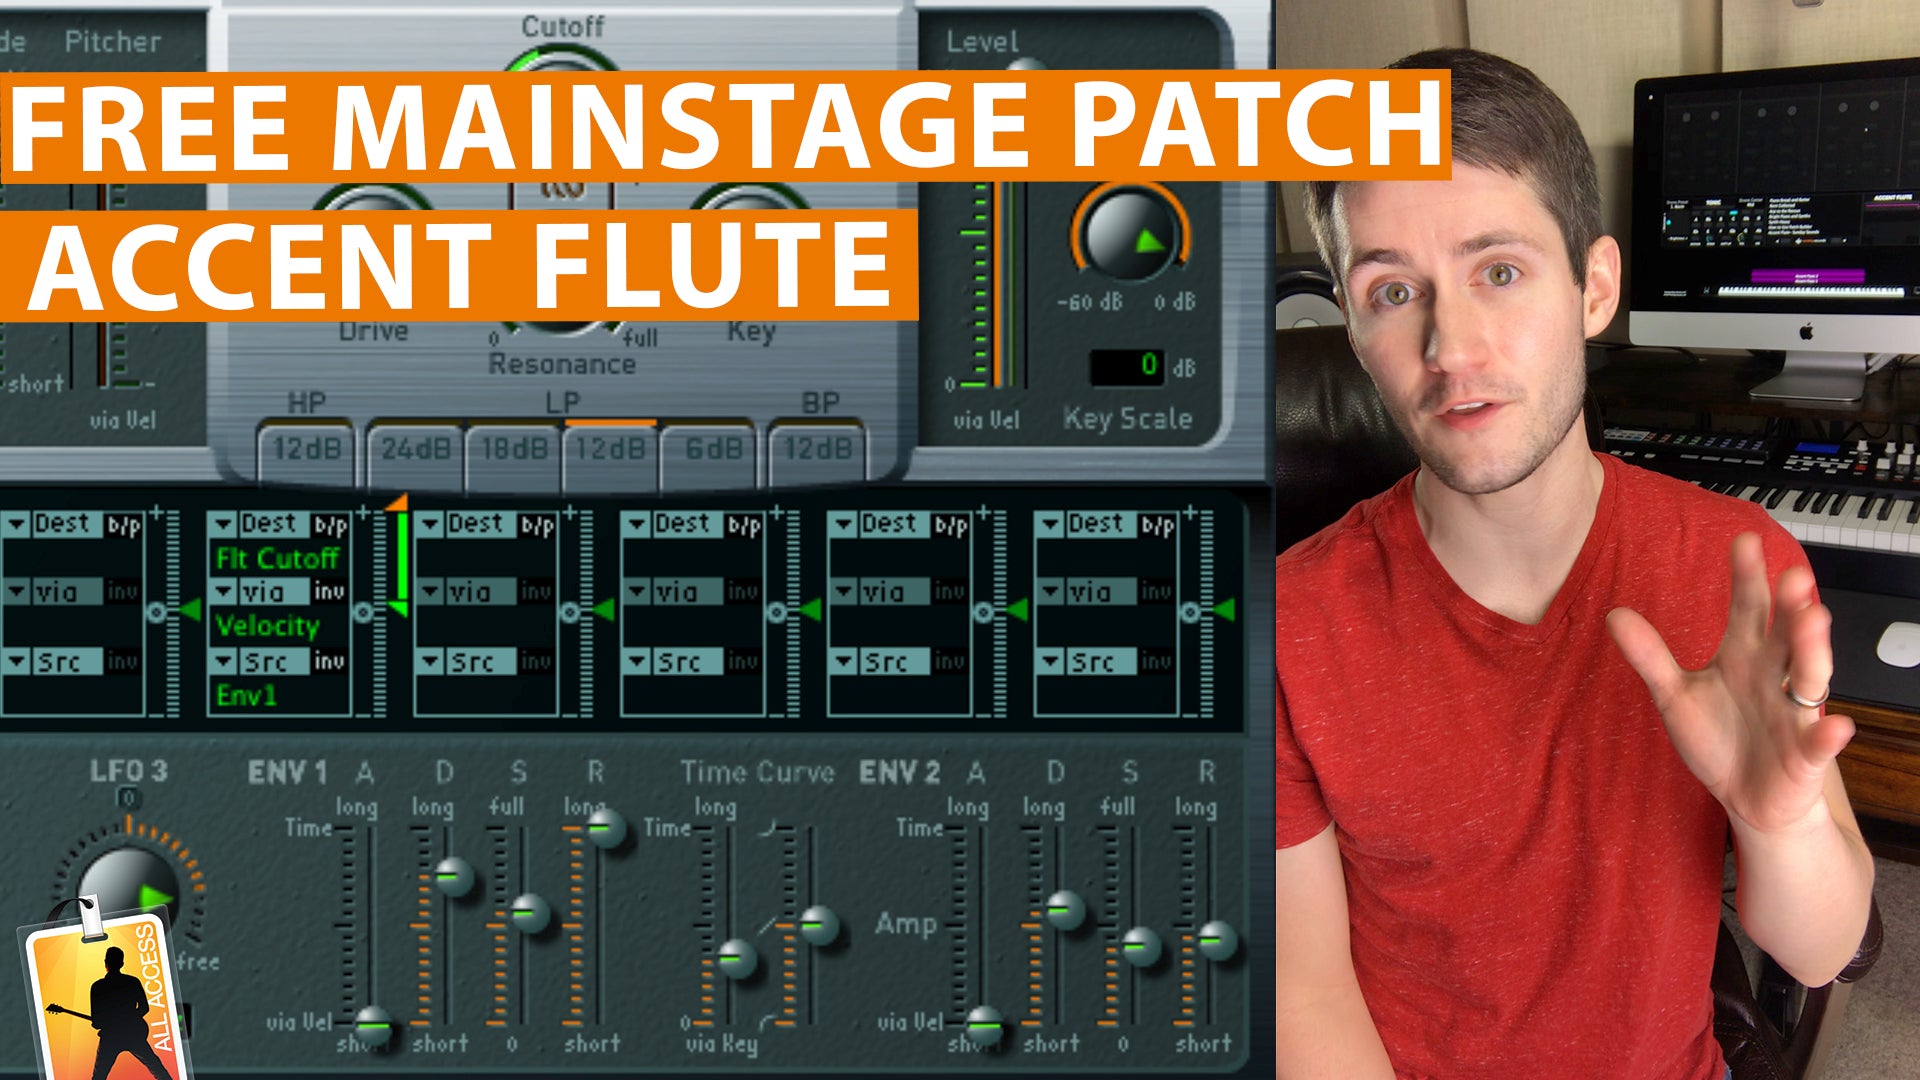 Free MainStage Worship Patch! - Accent Flute